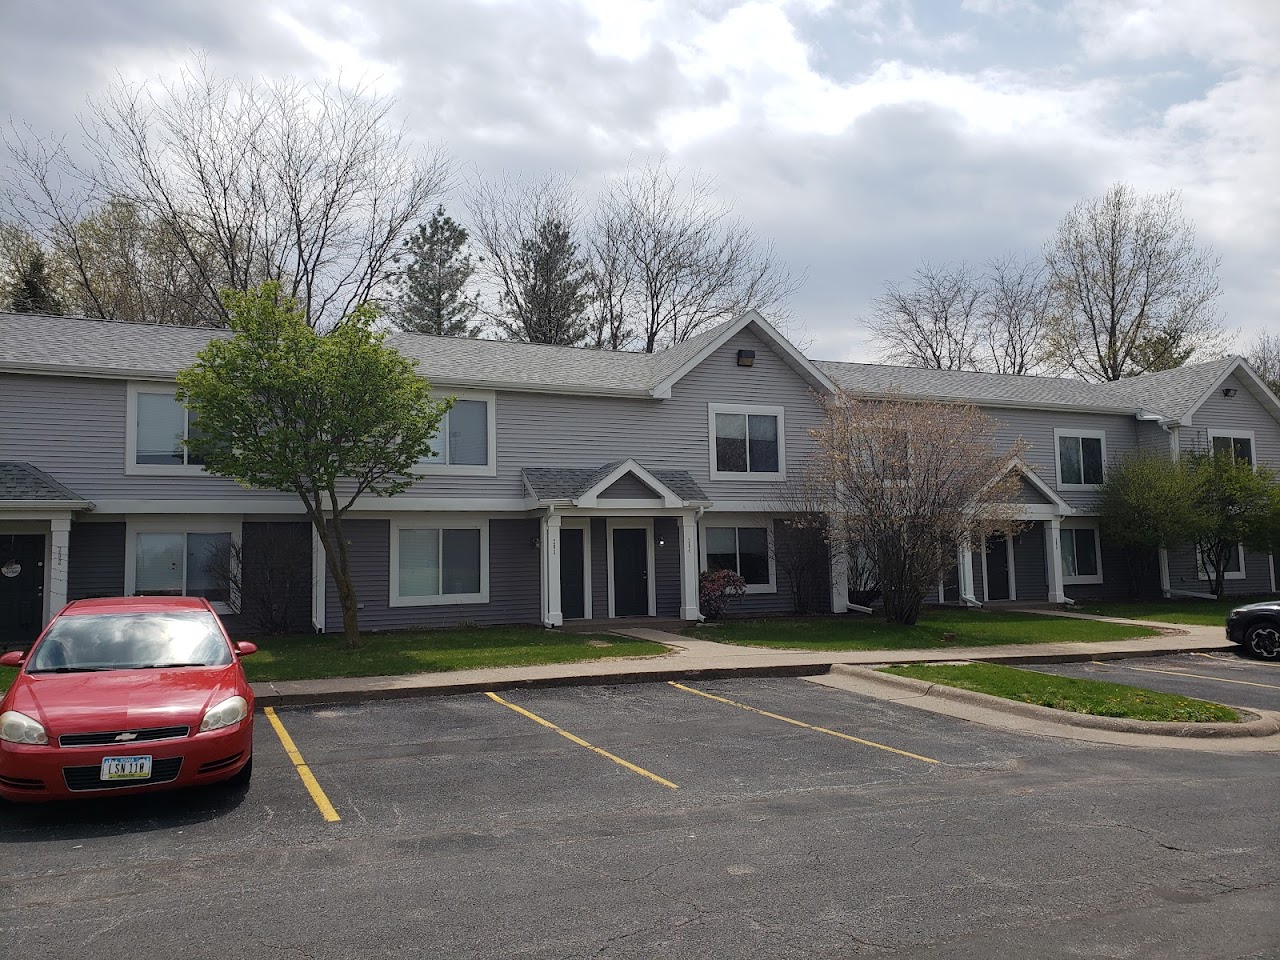 Photo of COLORADO PARK APTS. Affordable housing located at 401 COLORADO ST MUSCATINE, IA 52761